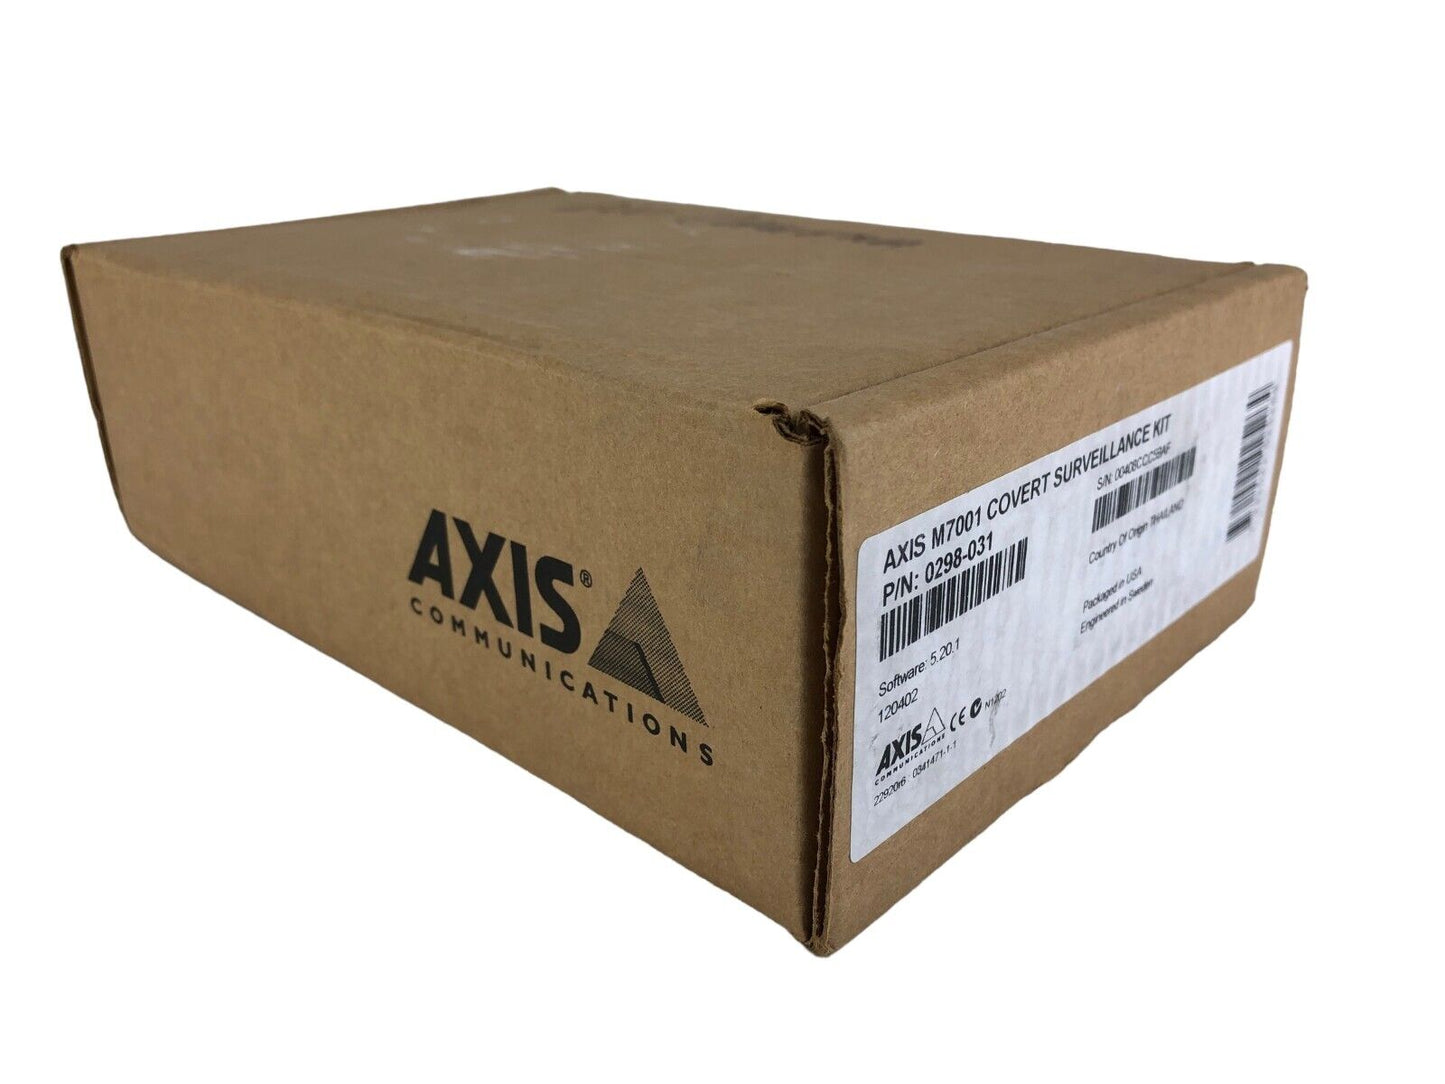 Axis M7001 0298-001 And Axis 5700-471 Covert Surveillance Camera 0298-031 New